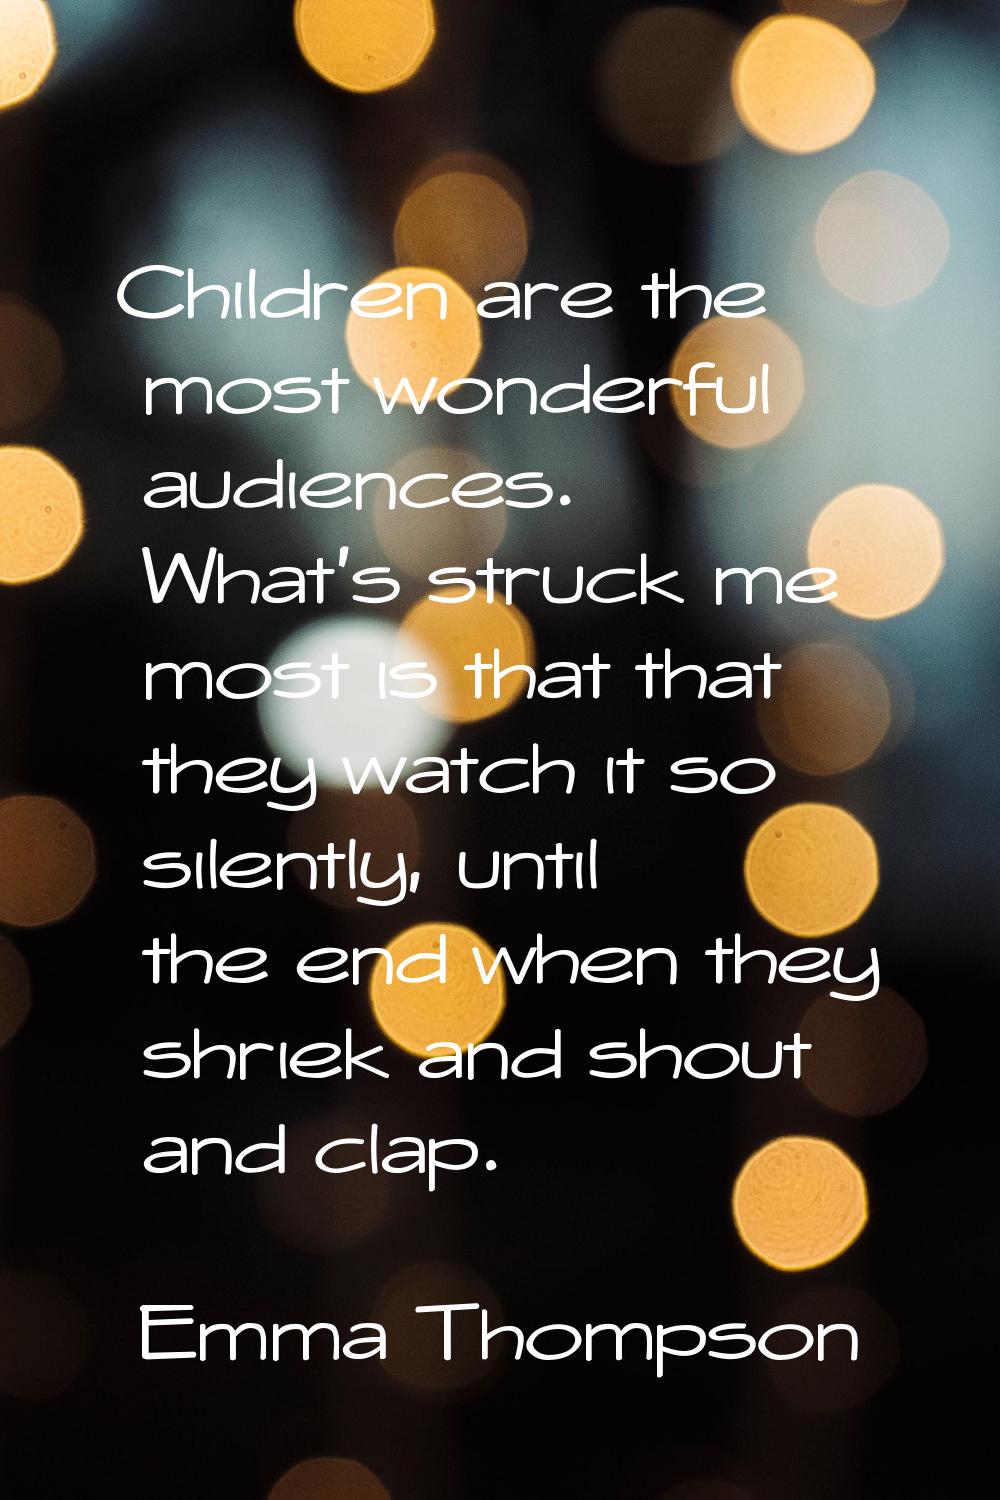 Children are the most wonderful audiences. What's struck me most is that that they watch it so sile